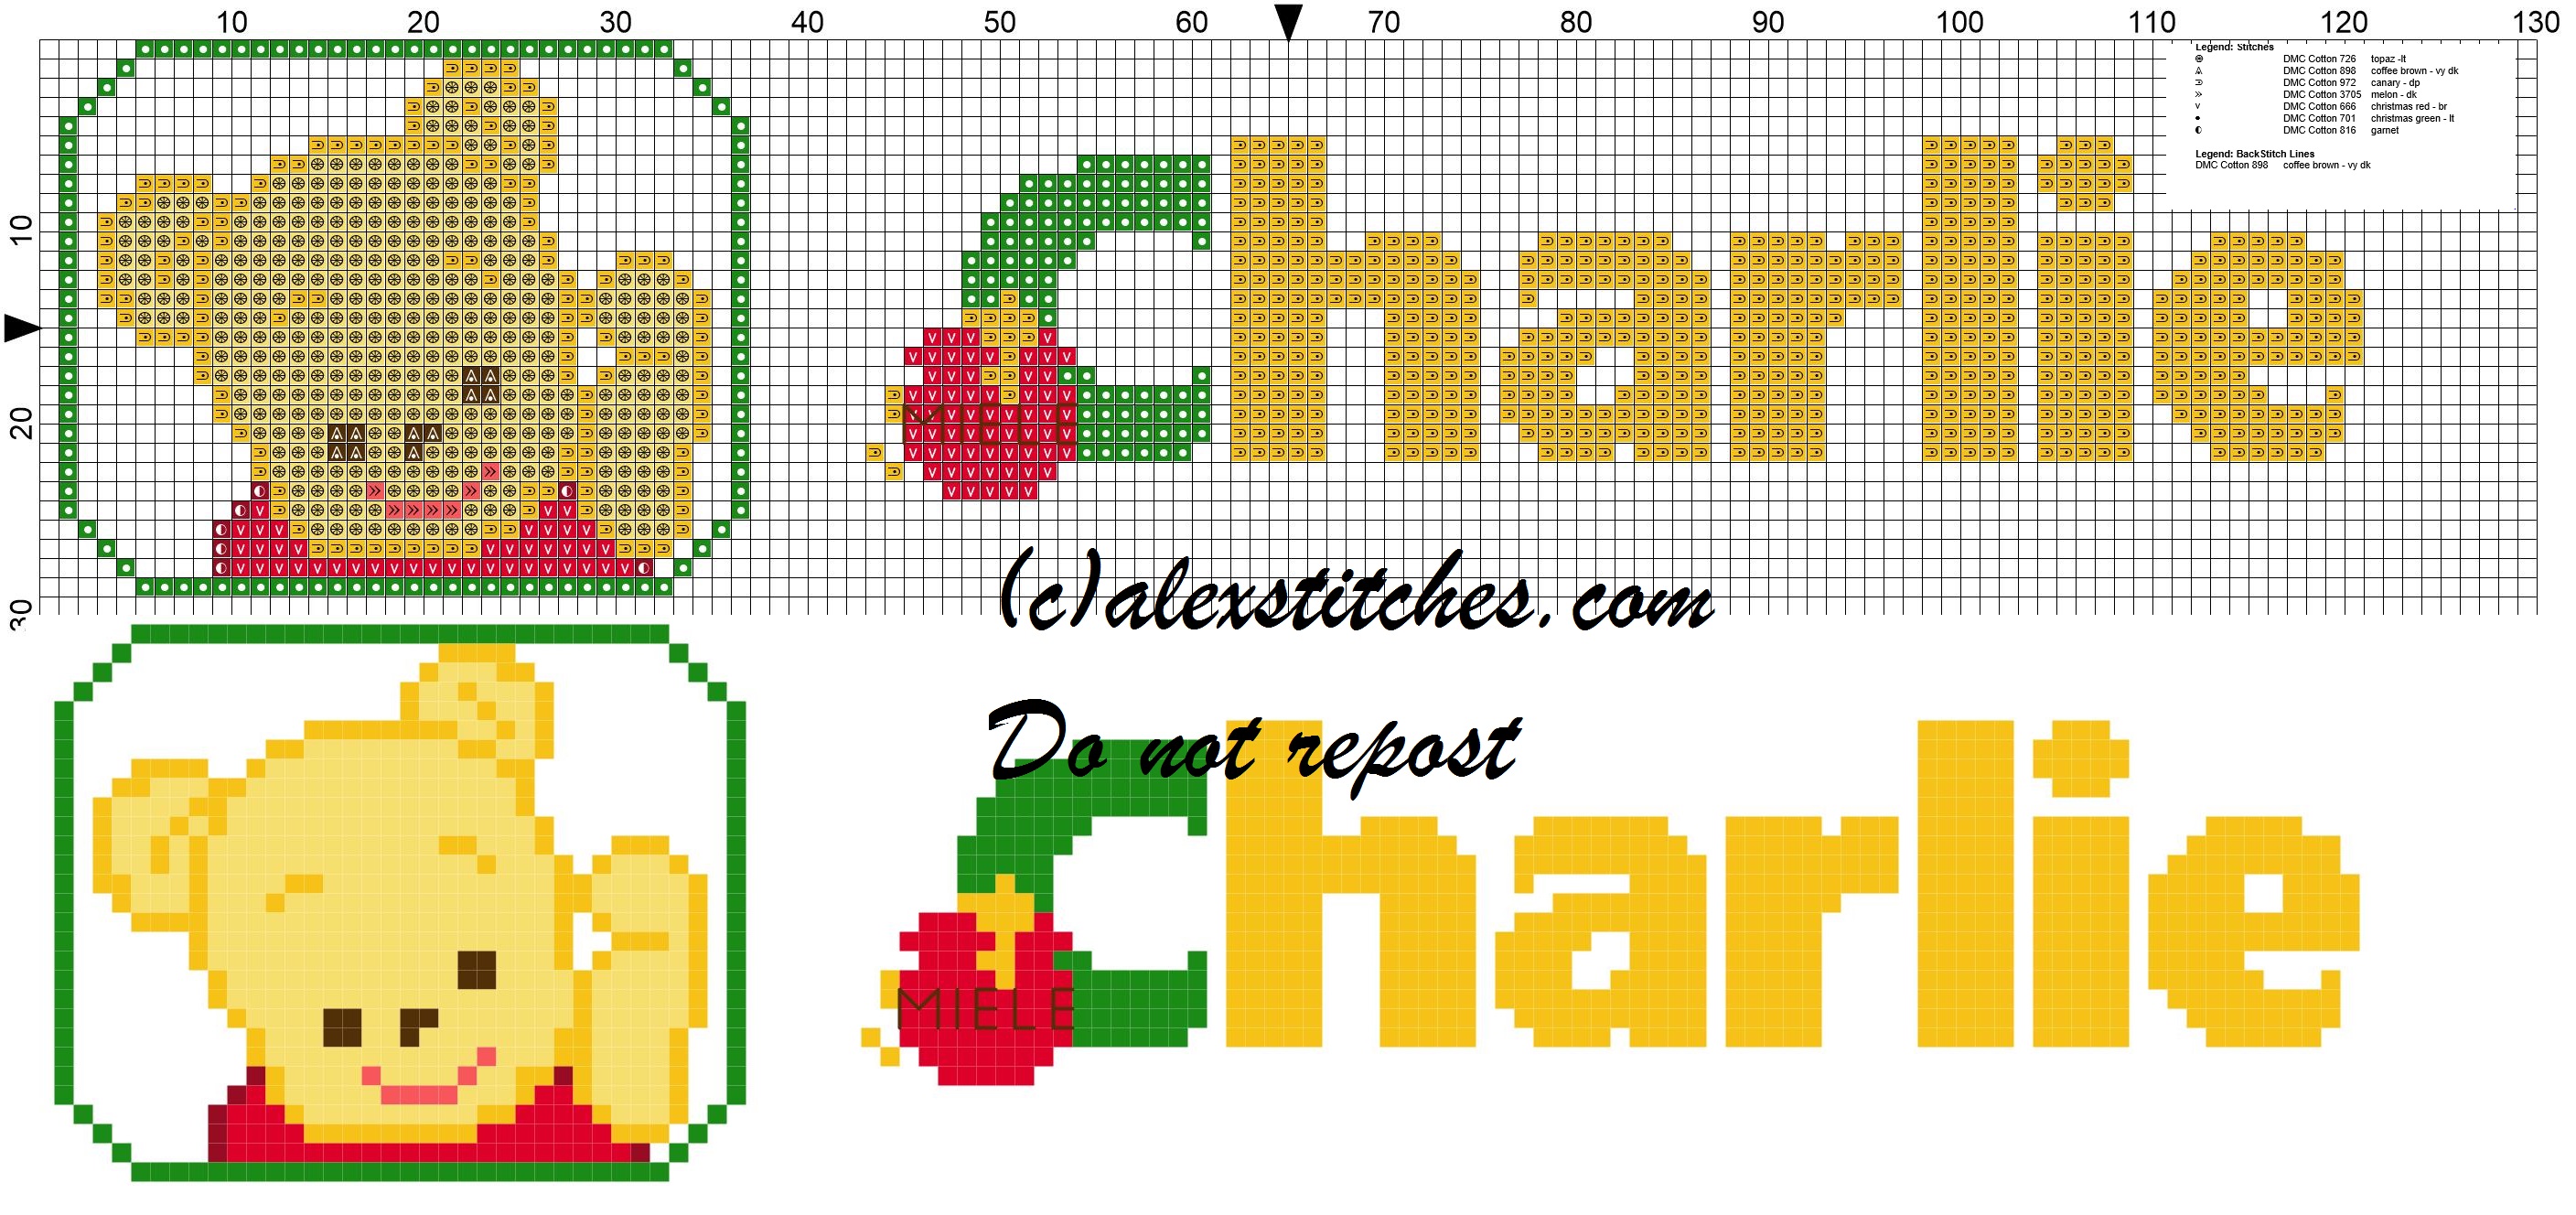 Charlie name with Baby winnie the pooh free cross stitches pattern